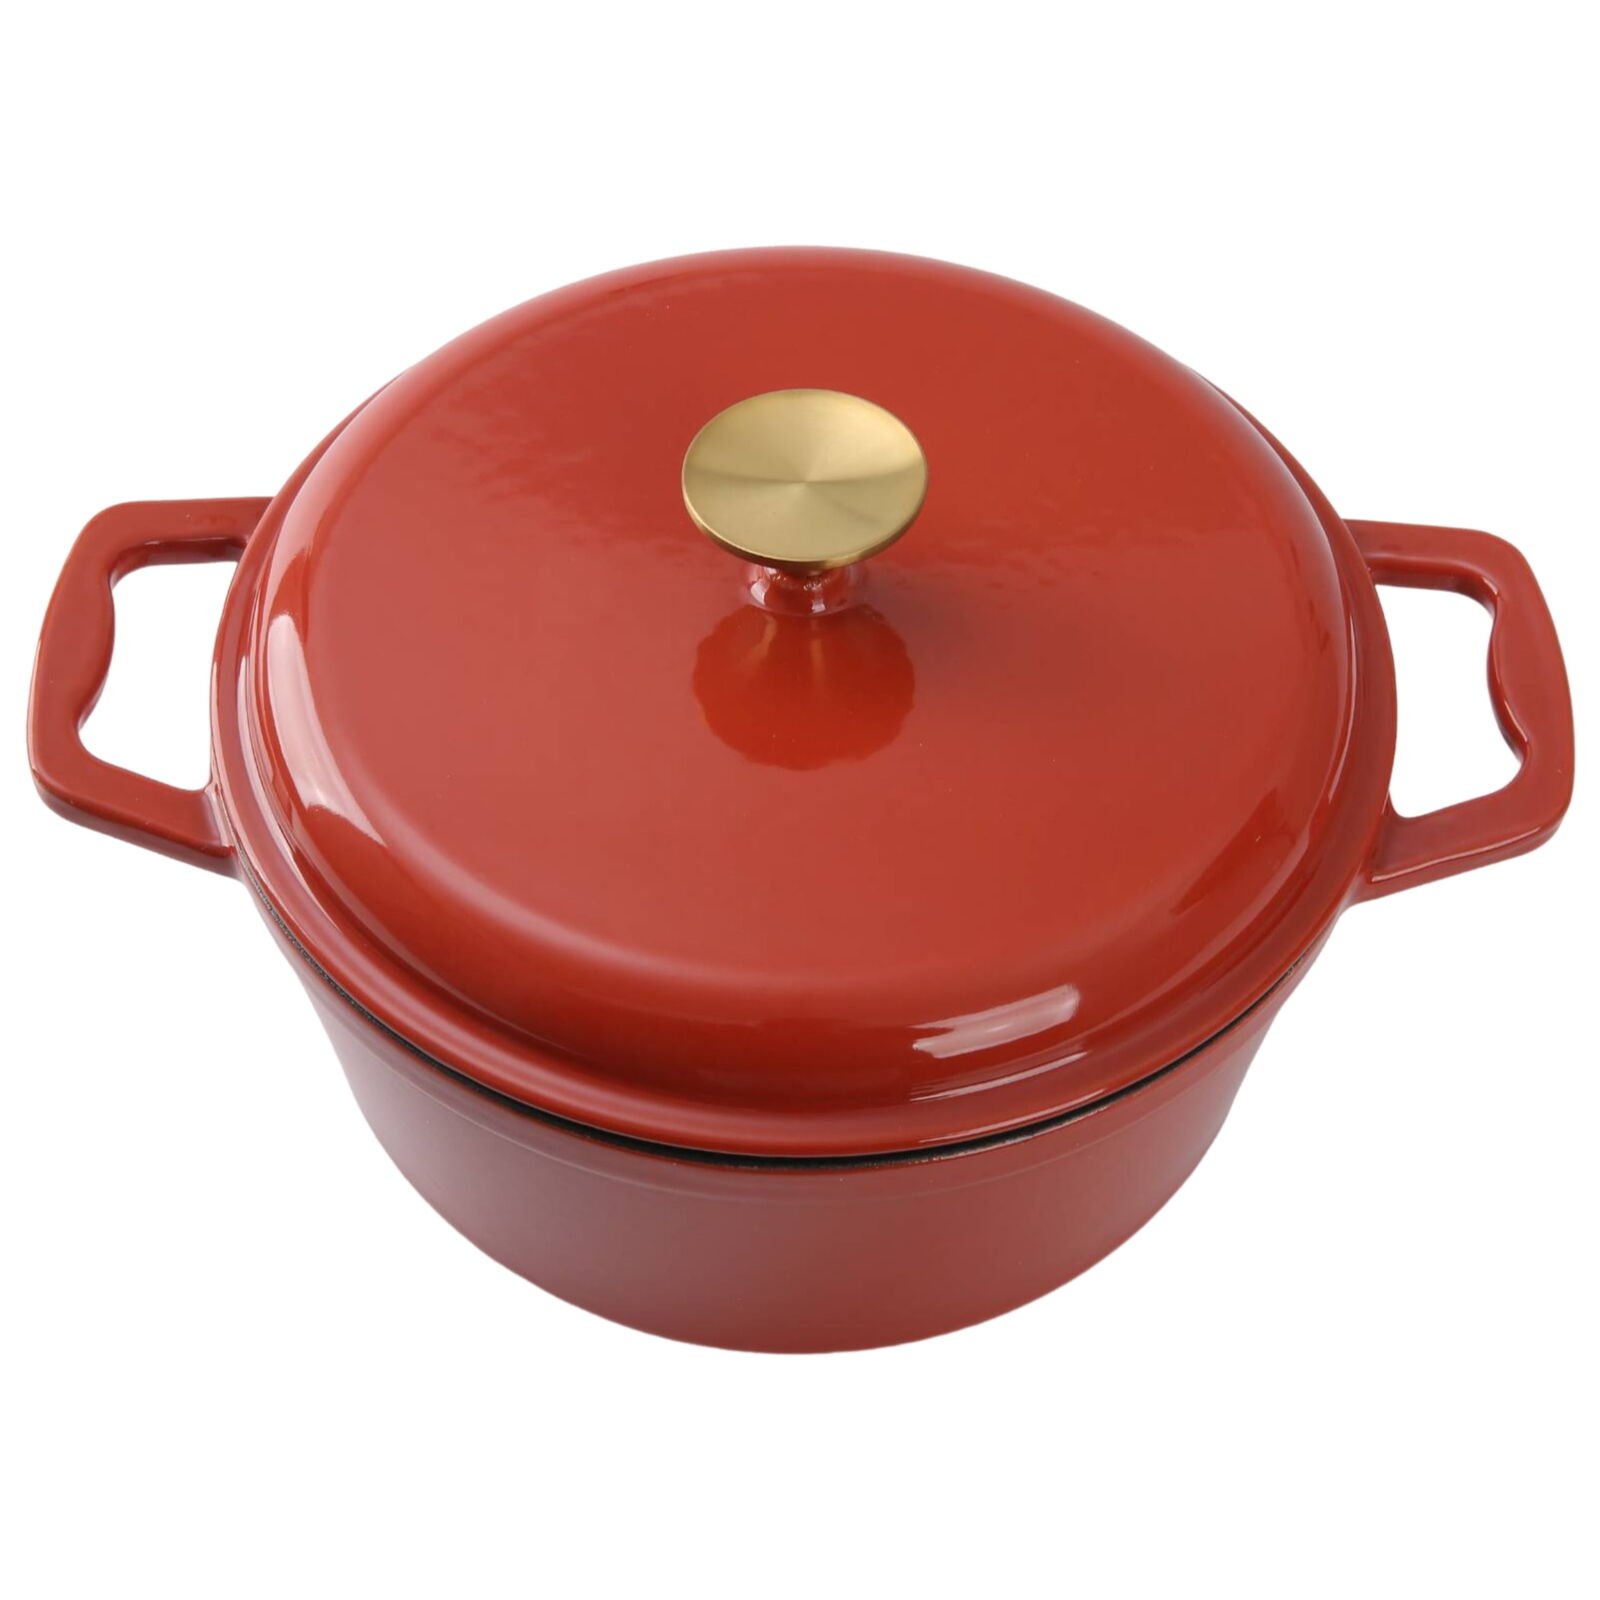 Mainstays 4.75qt Ceramic Enamel Cast Iron Dutch Oven Red with Lid